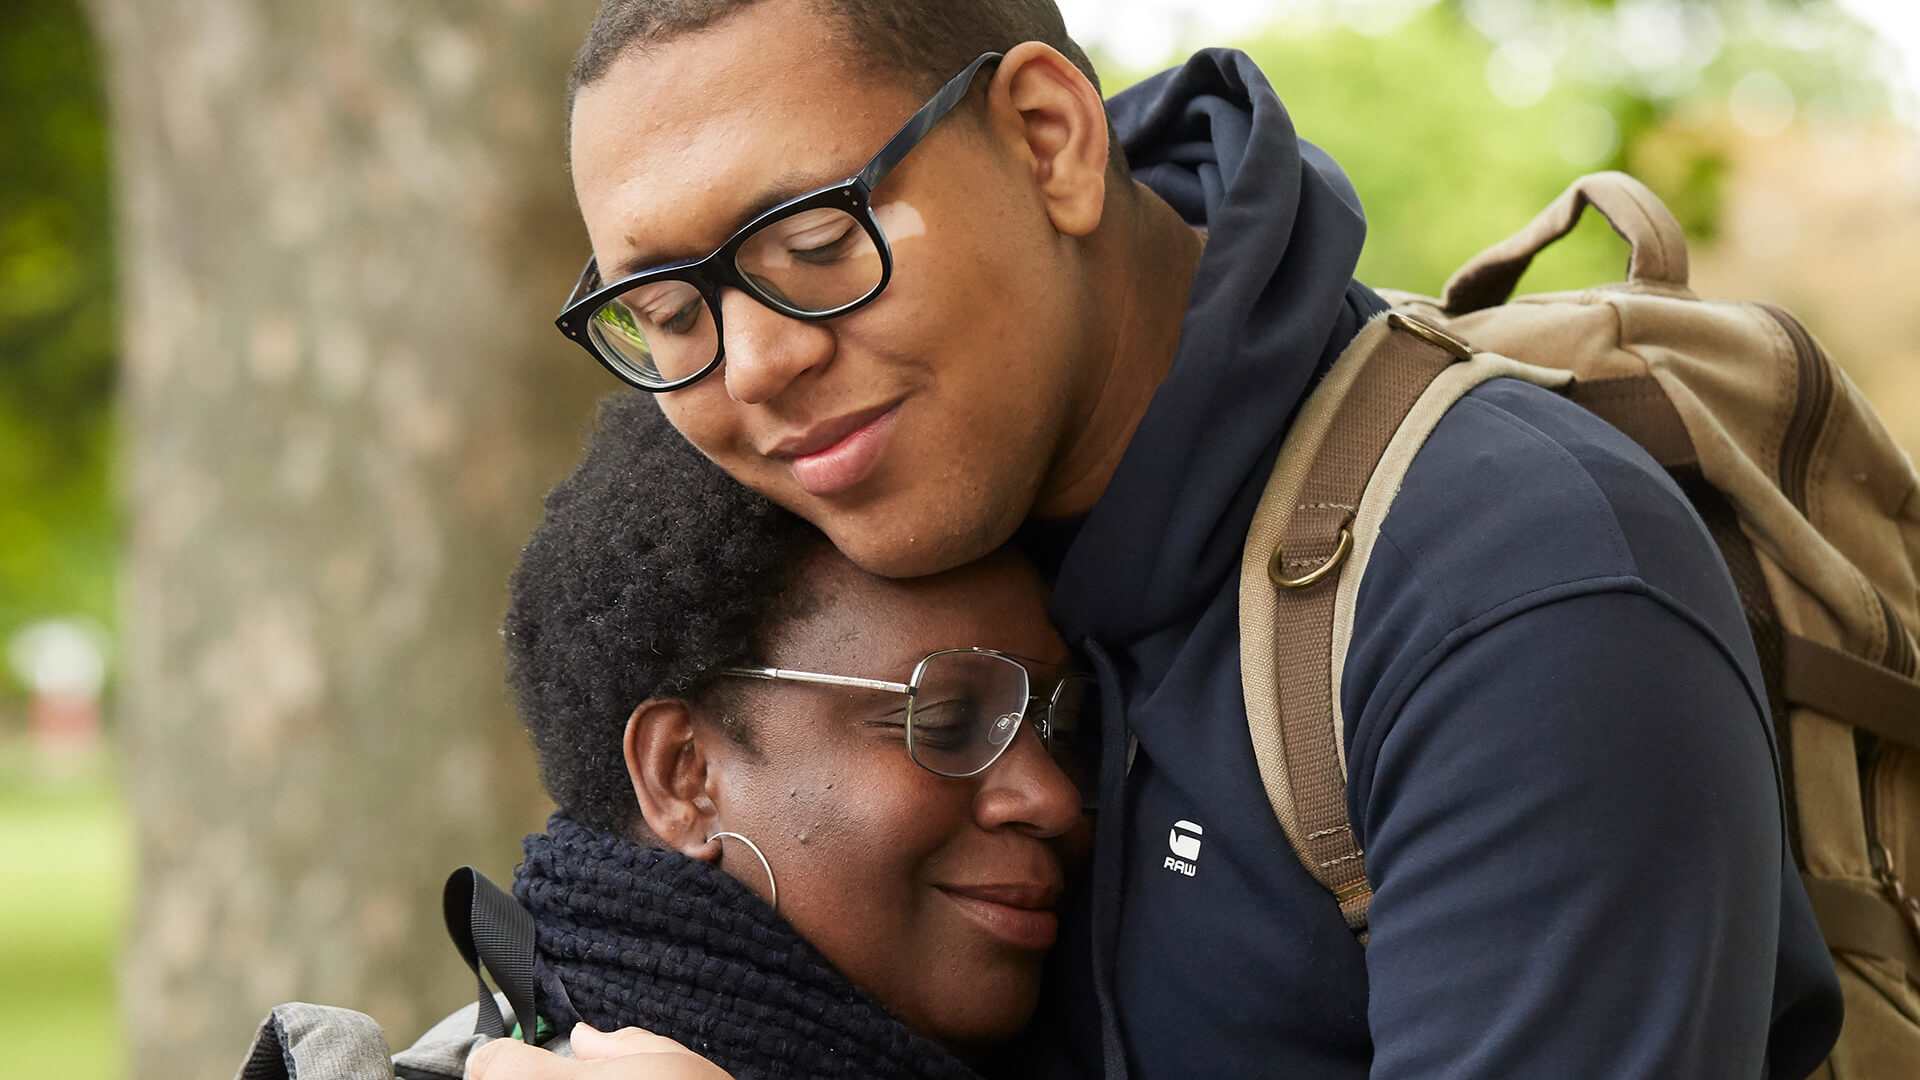 A mother and son smiling hugging in a park by a tree